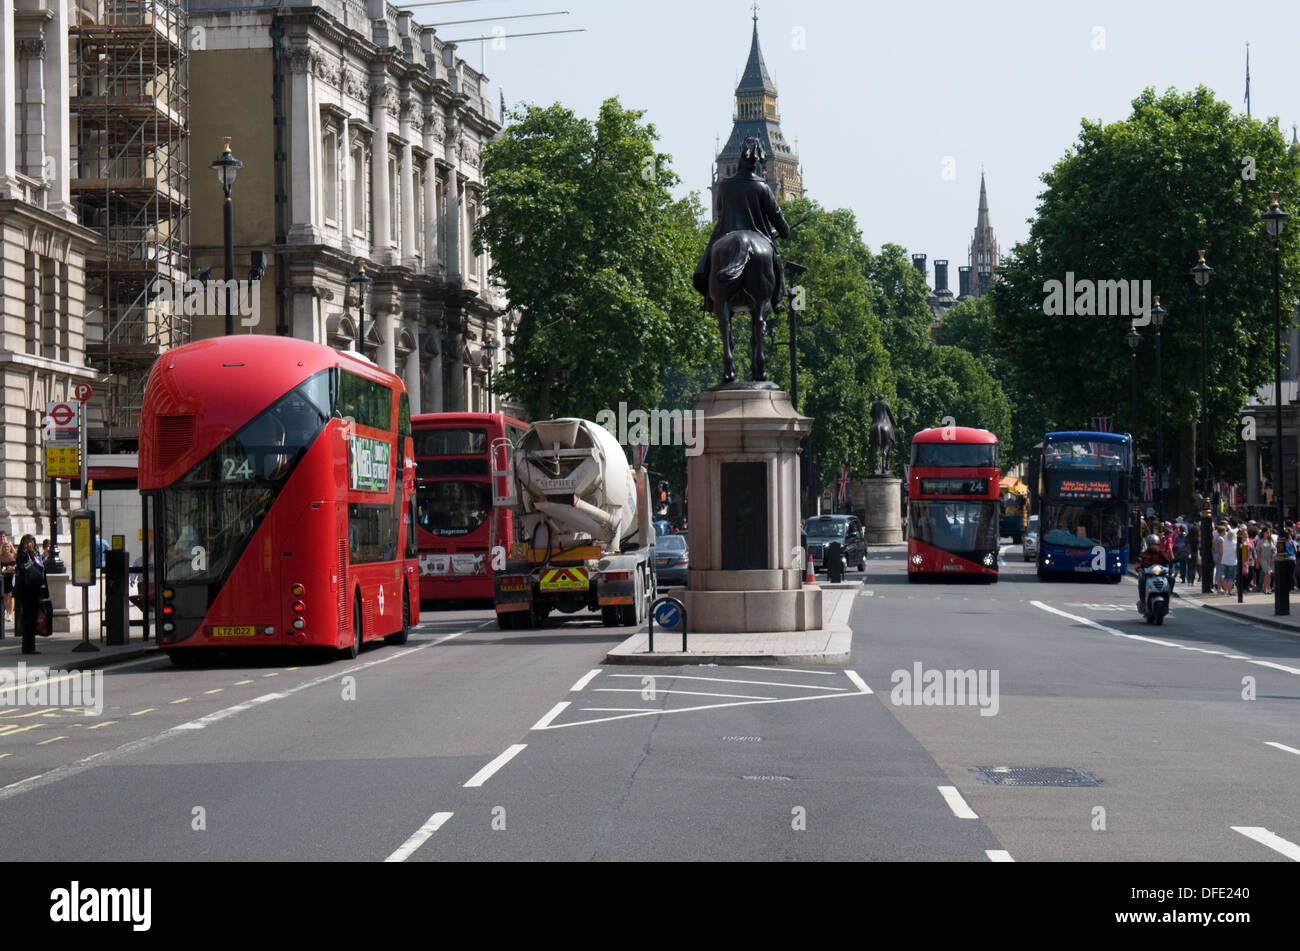 Looking along Whitehall, London towards Parliament Square with two New buses for London on Route 24 in view Stock Photo